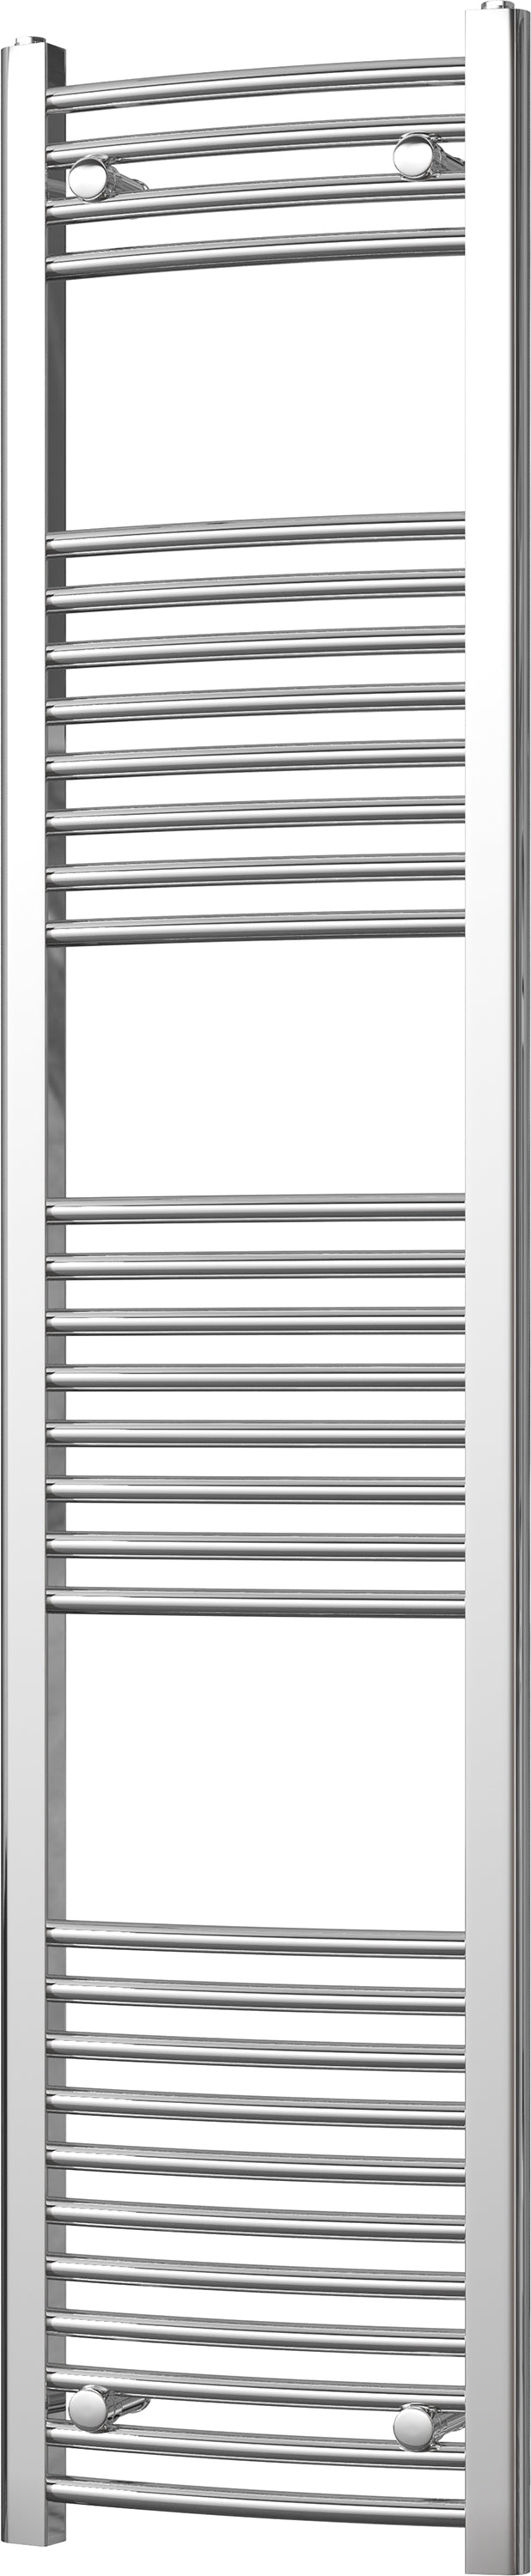 Zennor - Chrome Heated Towel Rail - H1800mm x W400mm - Curved